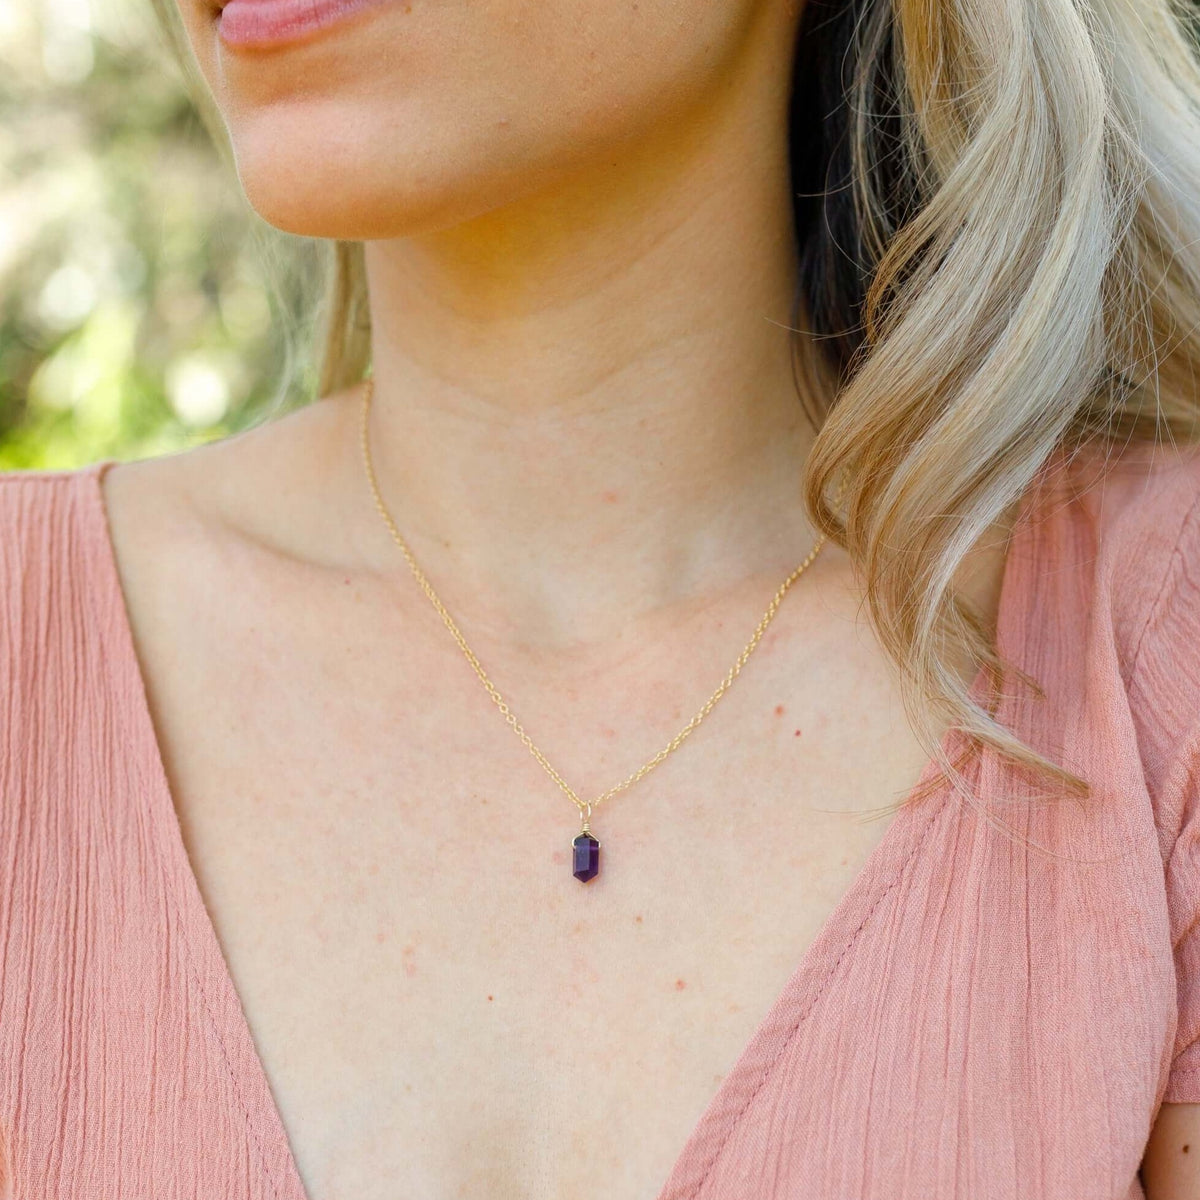 Double Terminated Crystal Pendant Necklace - Amethyst - 14K Gold Fill - Luna Tide Handmade Jewellery